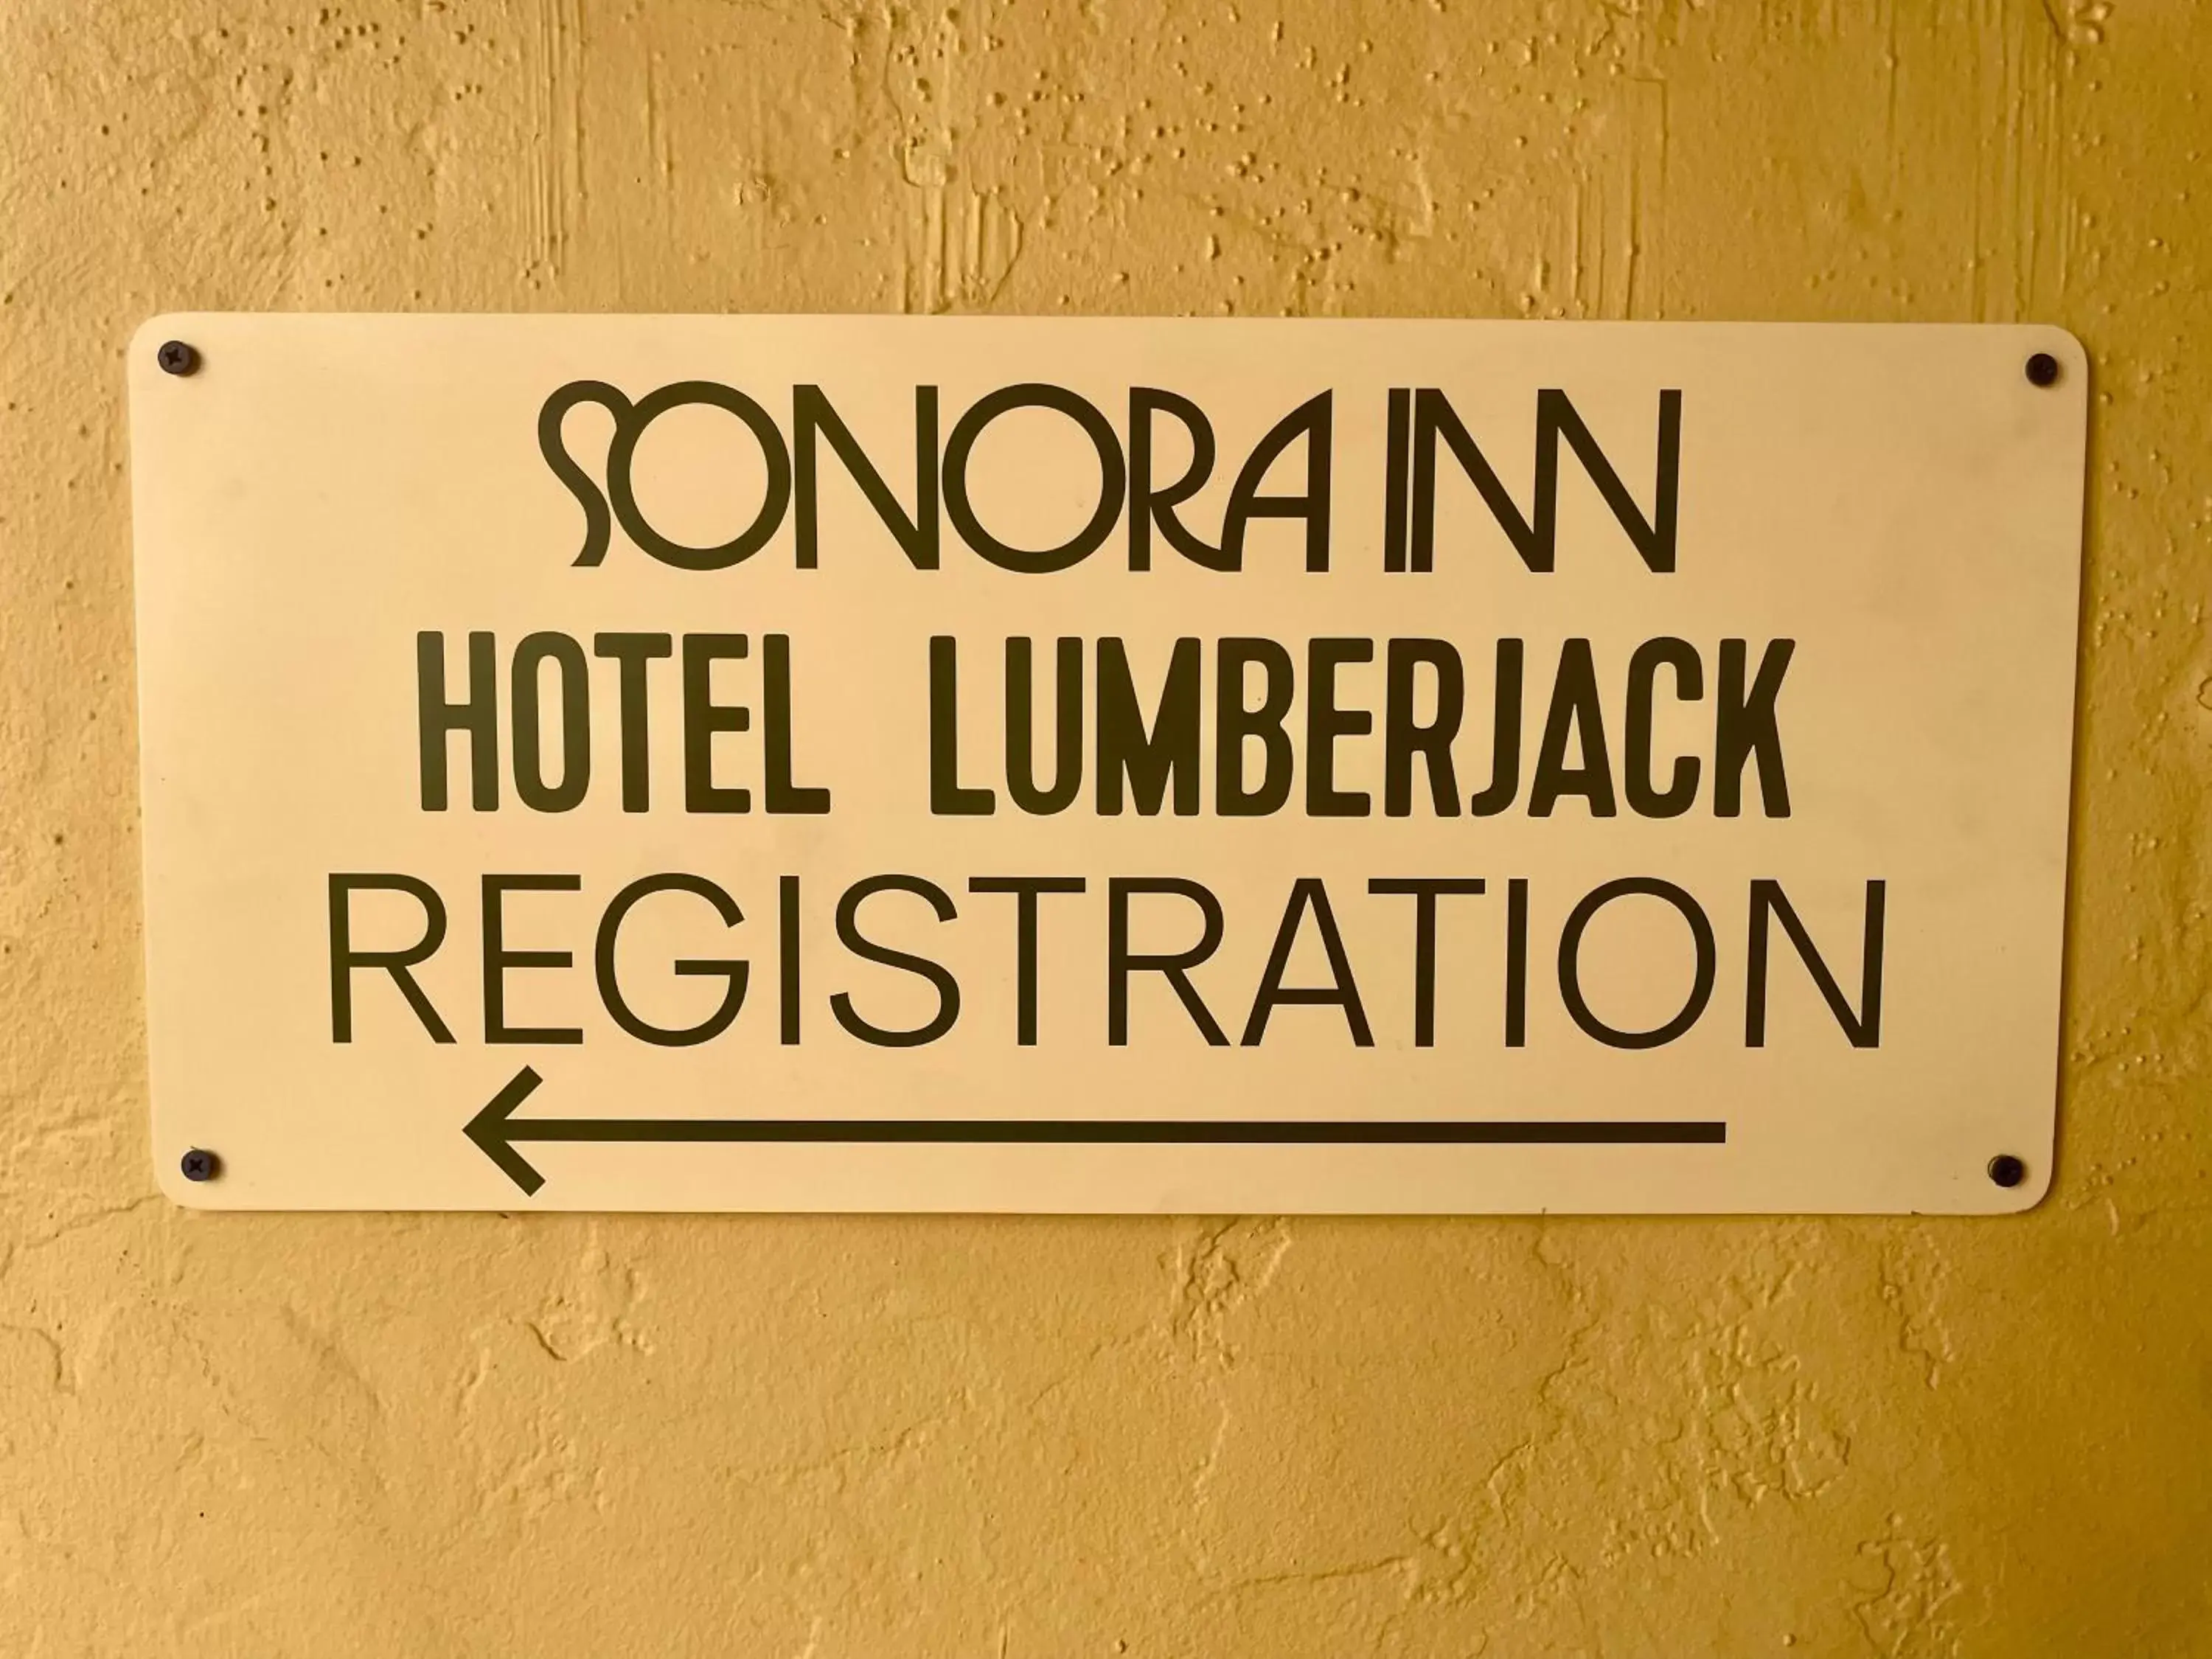 Property logo or sign in Historic Sonora Inn